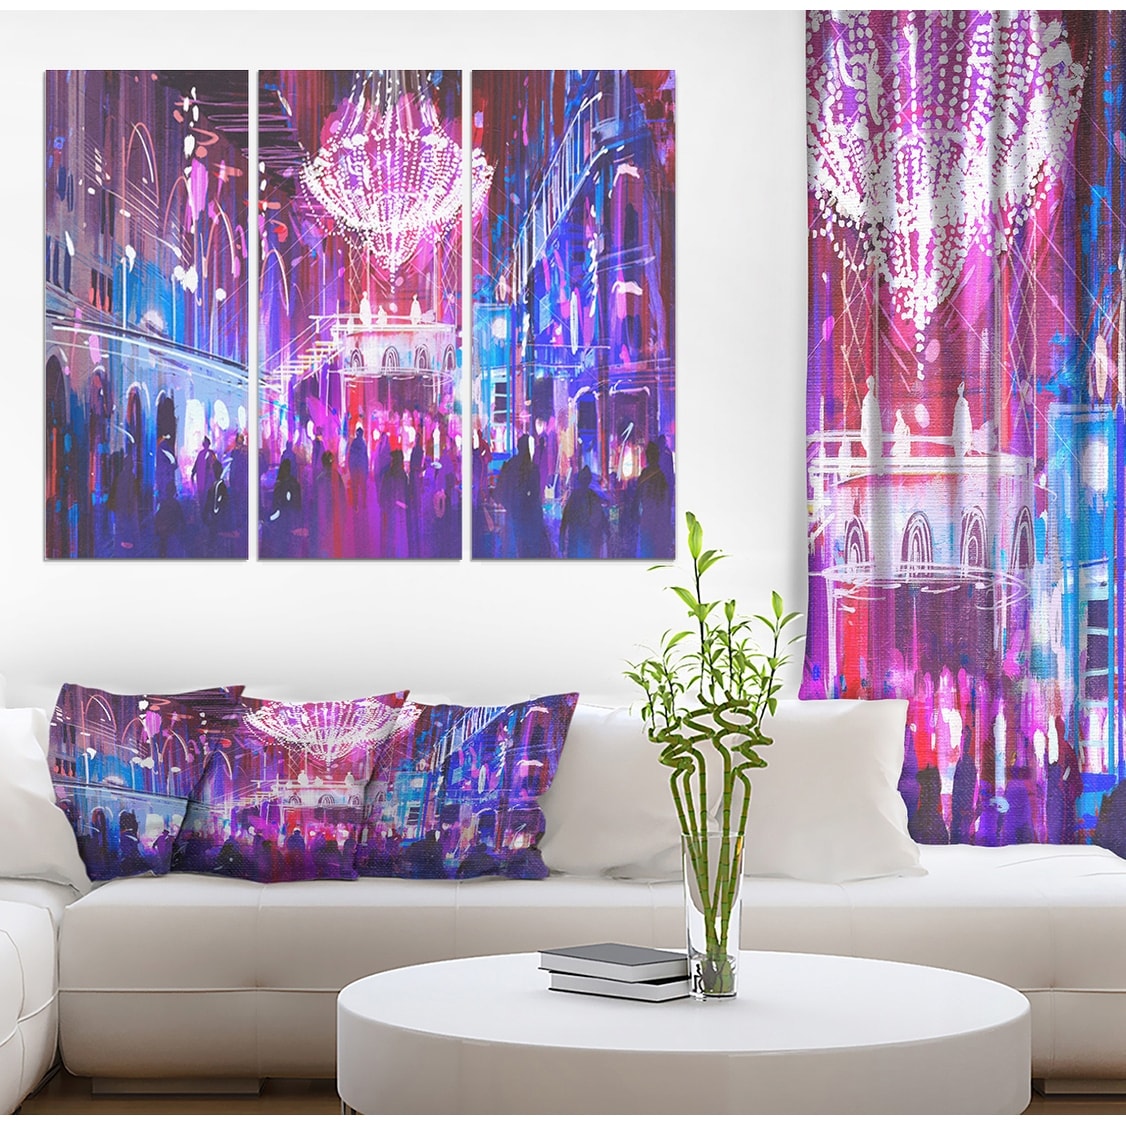 Mentor Abundantly øst Designart "Interior night club with bright lights" Cityscapes Photography  on Wrapped Canvas set - 36x28 - 3 Panels - - 32980722